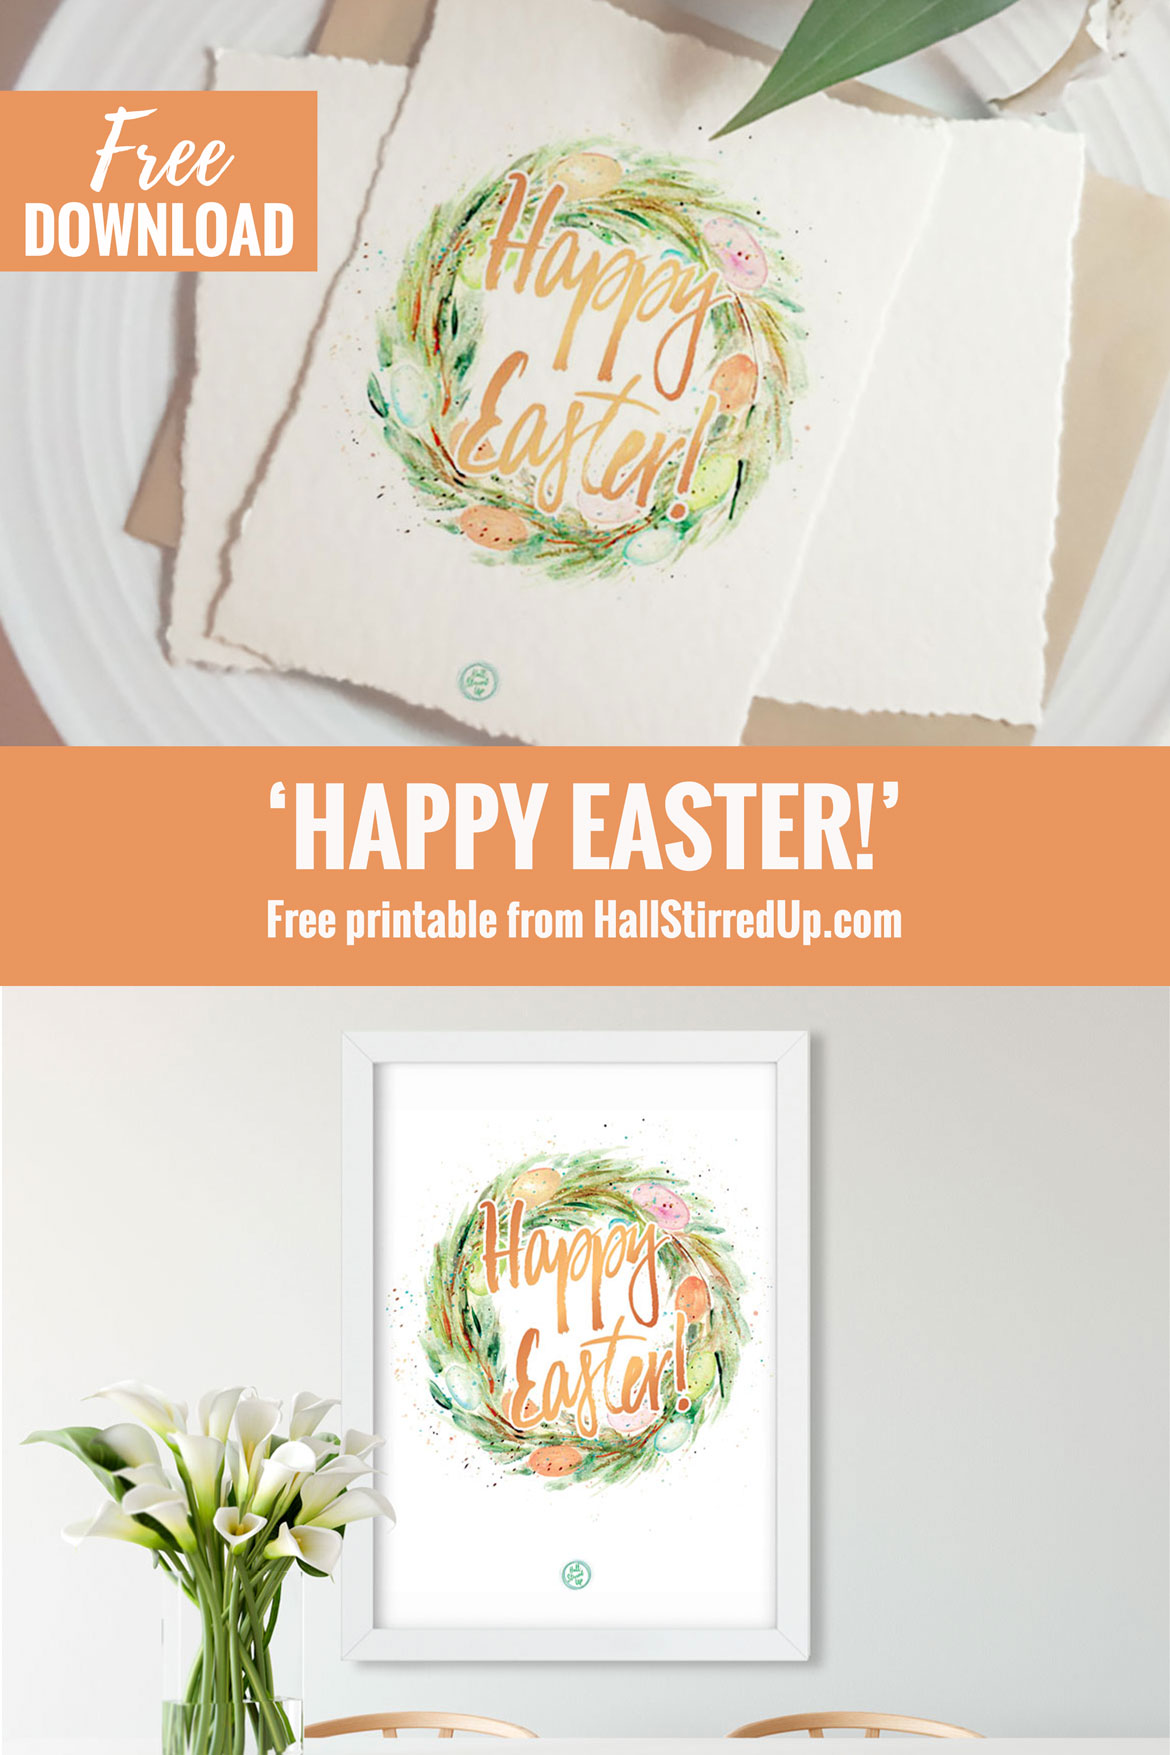 Happy Easter with a fun free printable